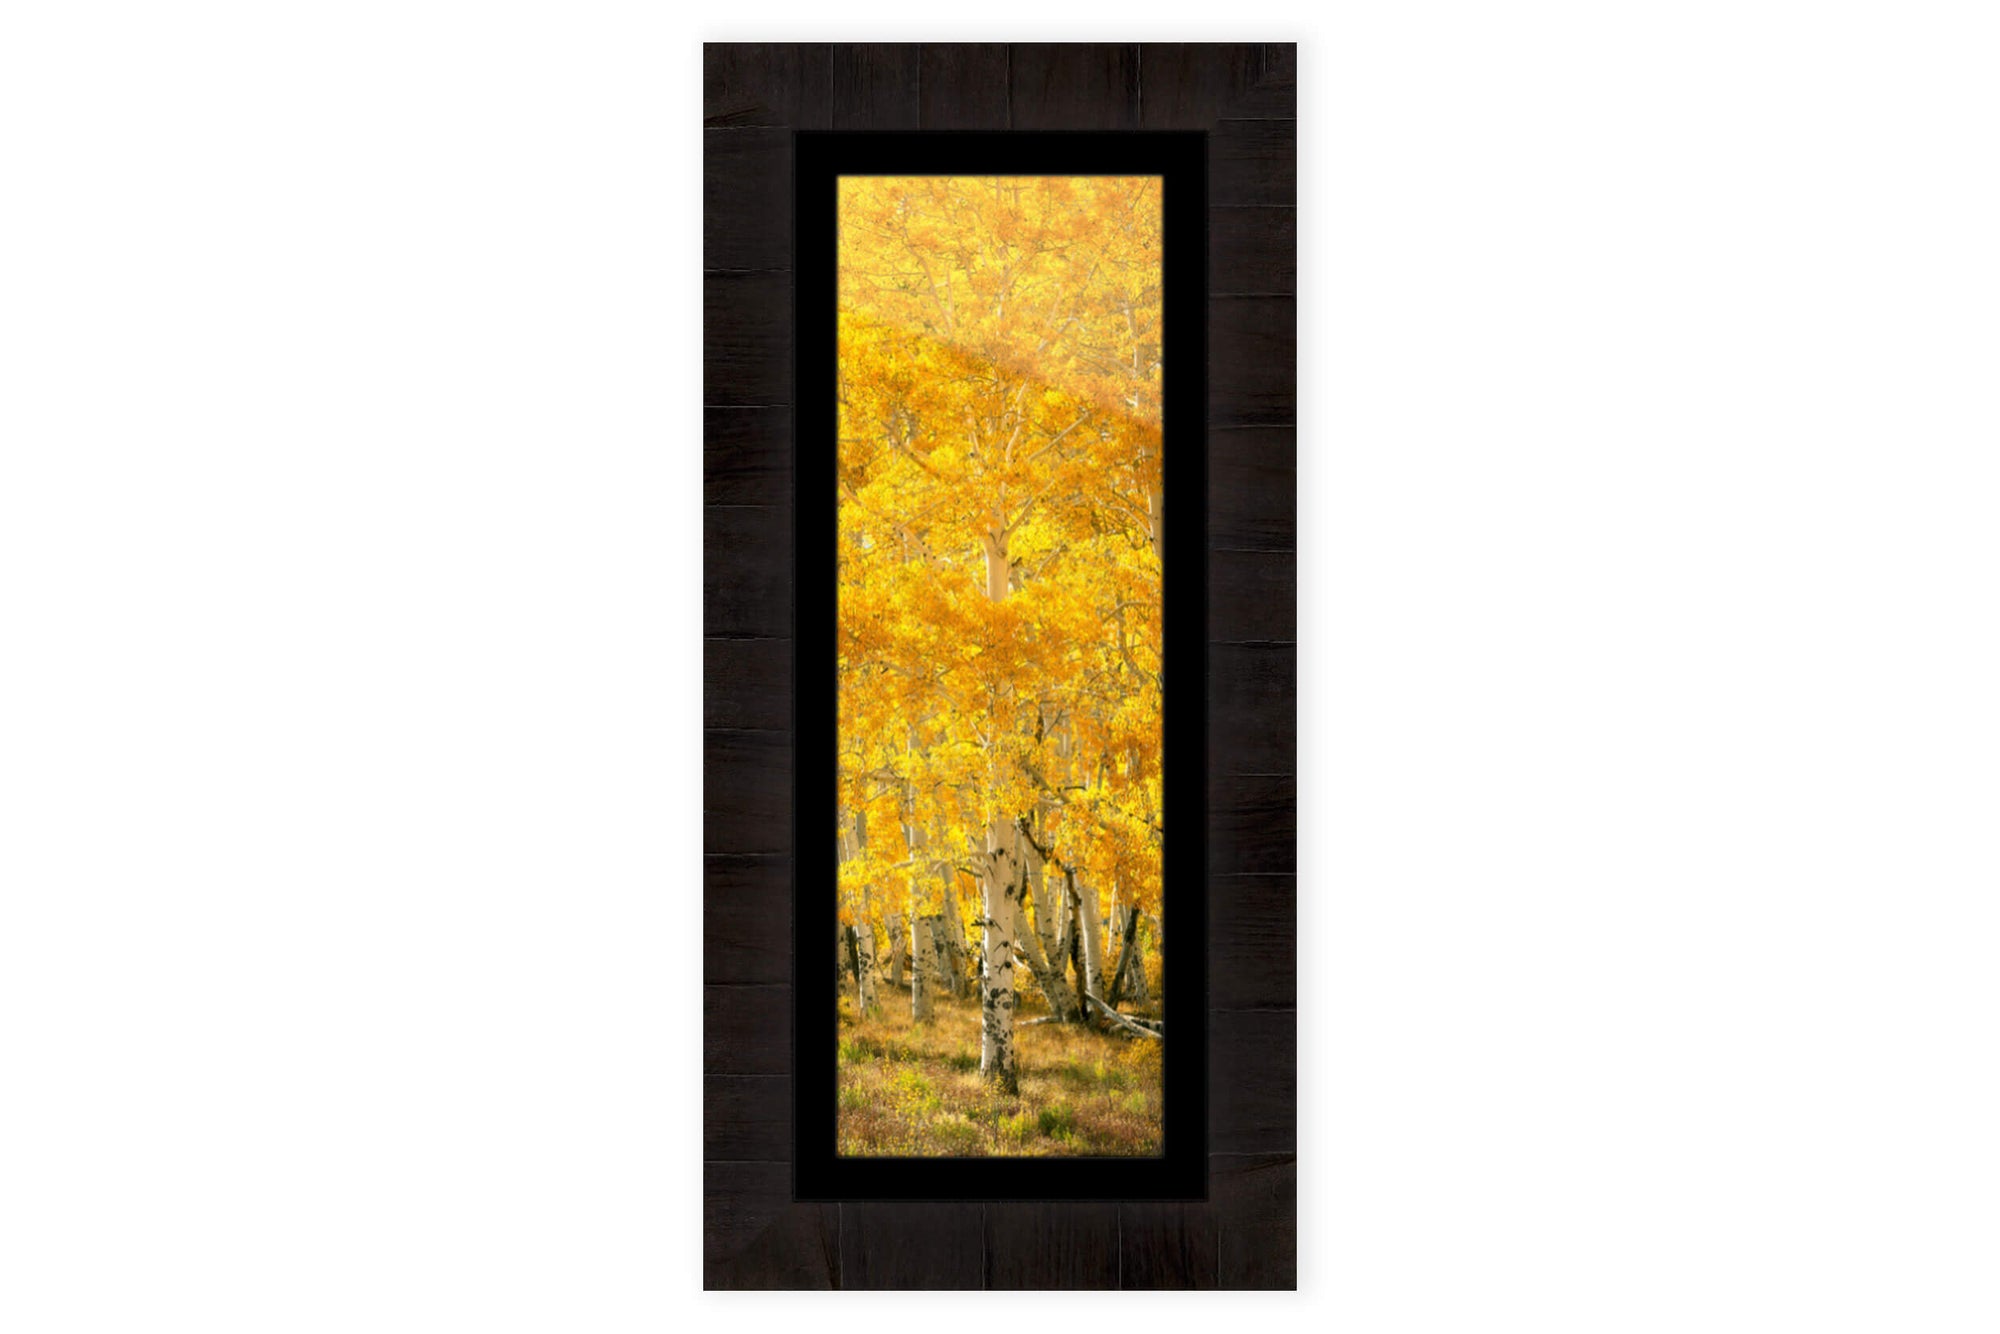 This piece of framed Telluride art shows an aspen tree during fall in Telluride.